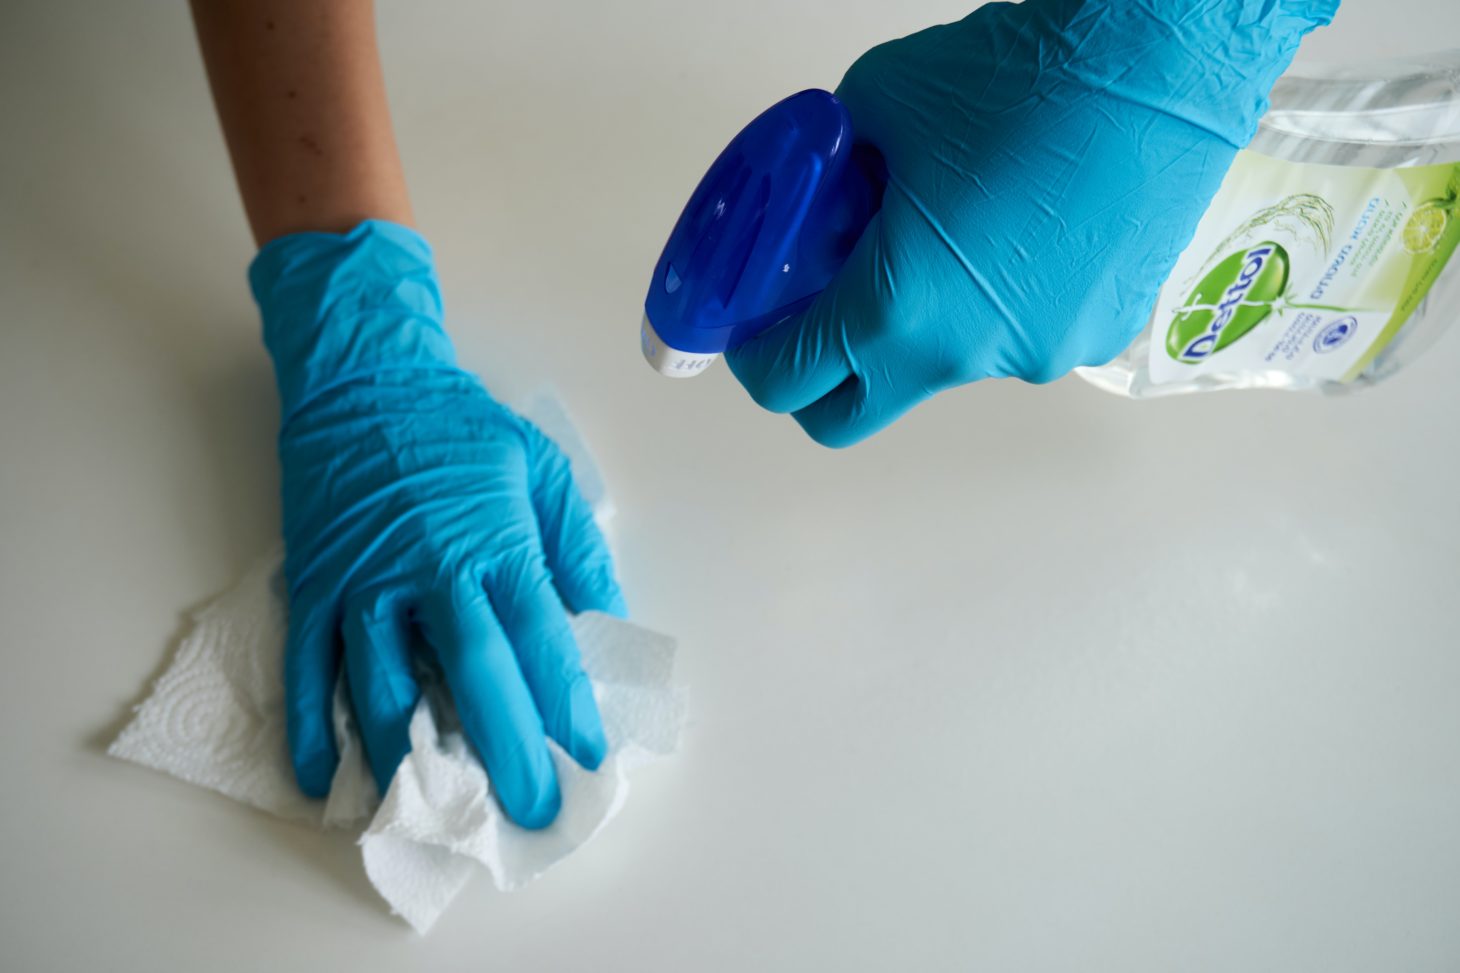 Cleaning surface with rubber gloves on using cleaner and paper towel 